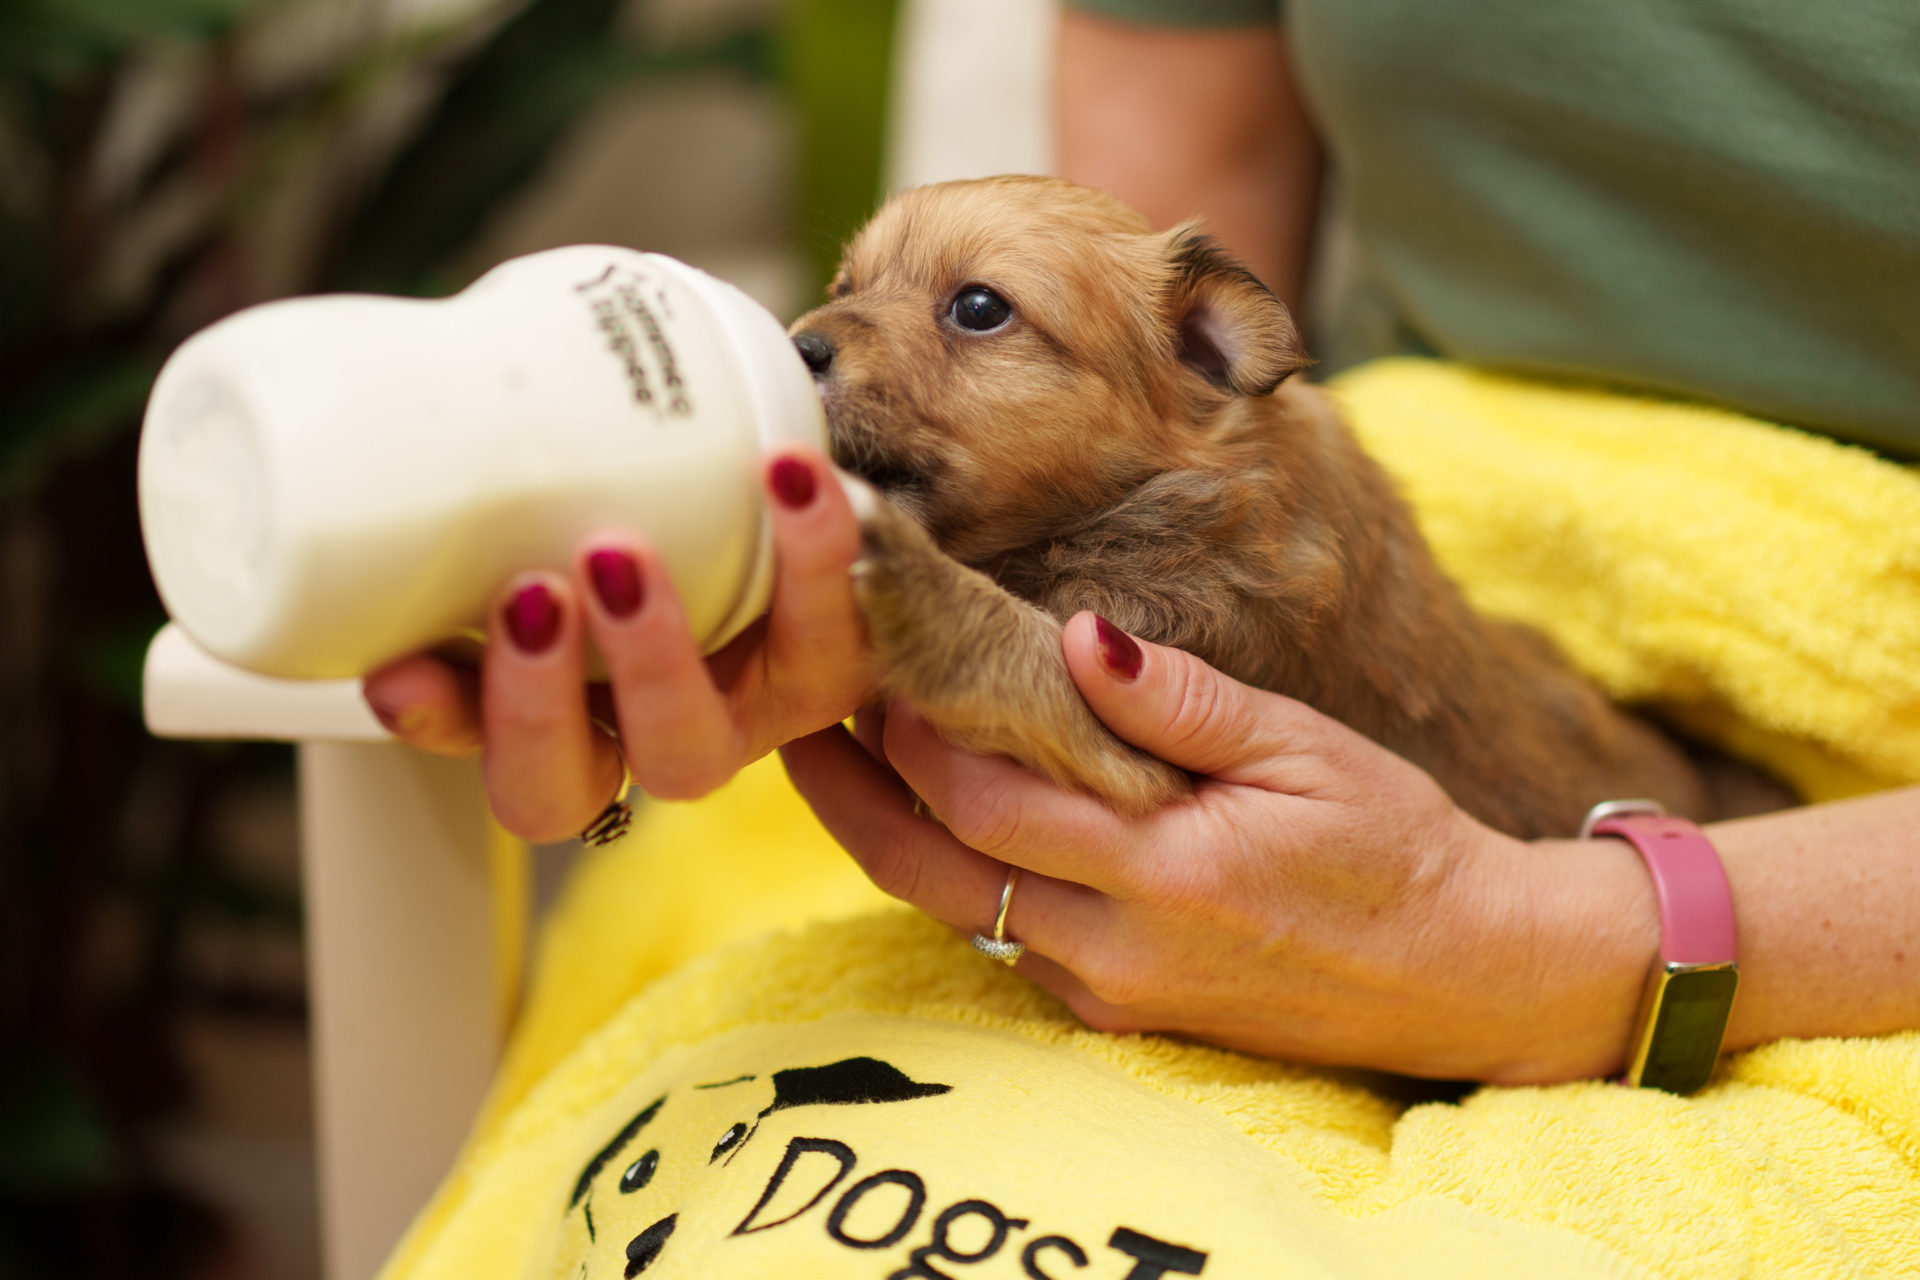 A four-week-old puppy who is being hand reared in Dogs Trust Ireland.